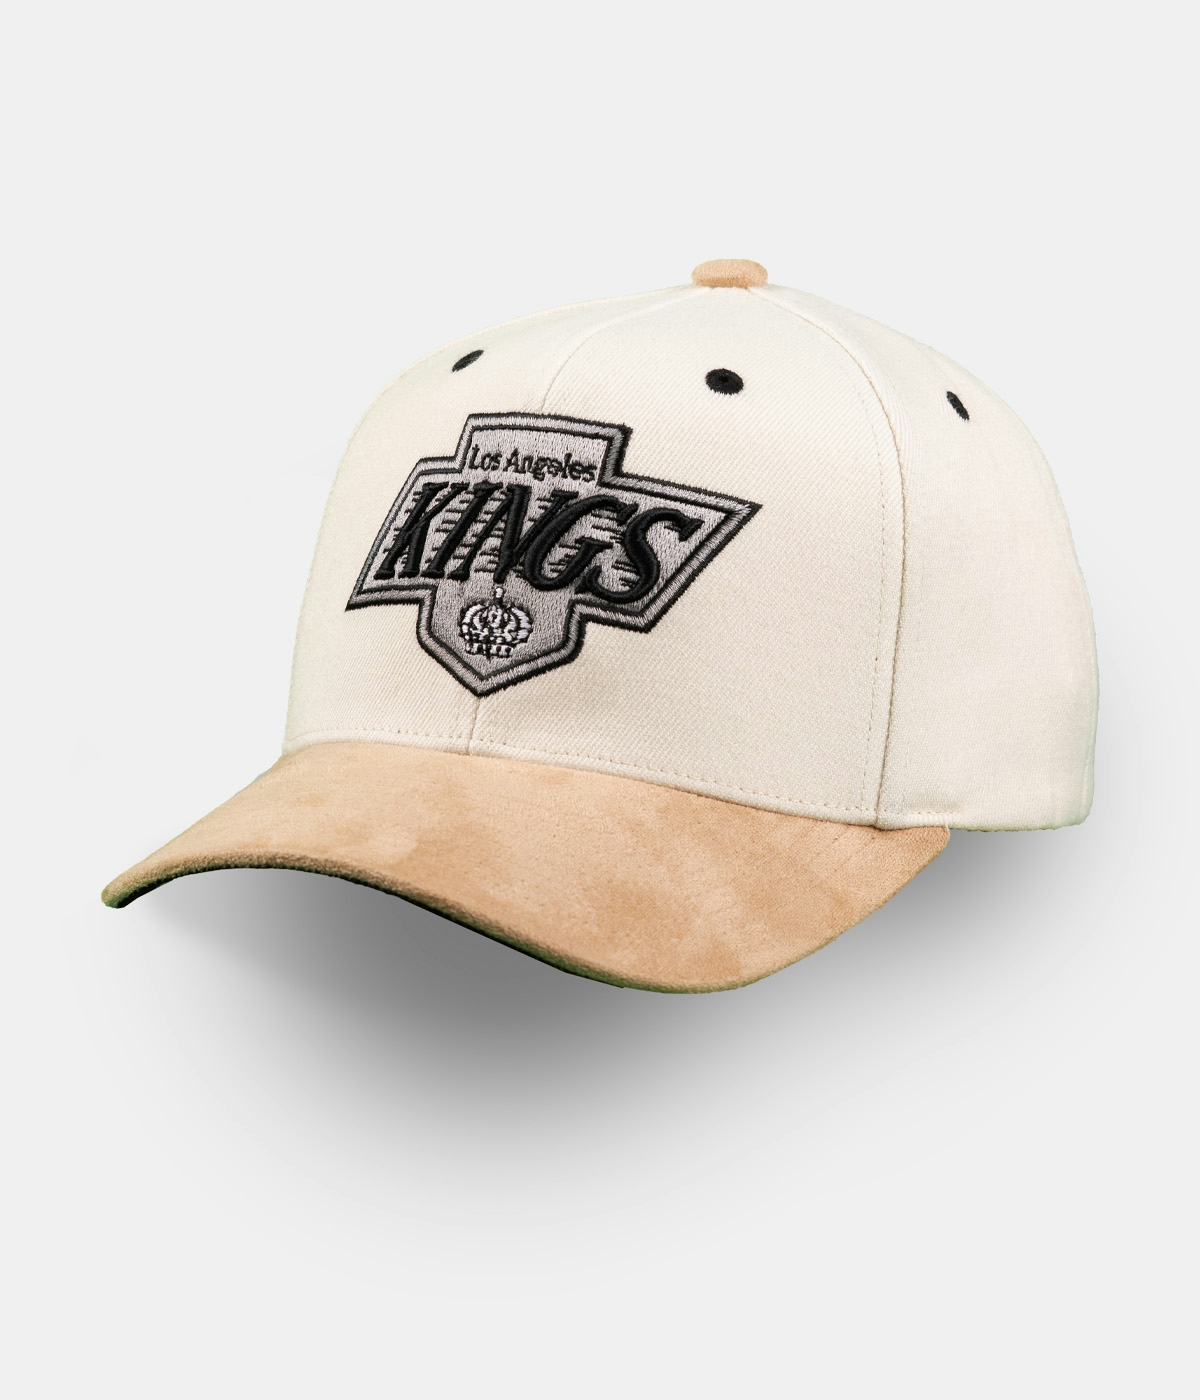 Mitchell & Ness Cap Cardinal Classic Red Los Angeles Kings Cream